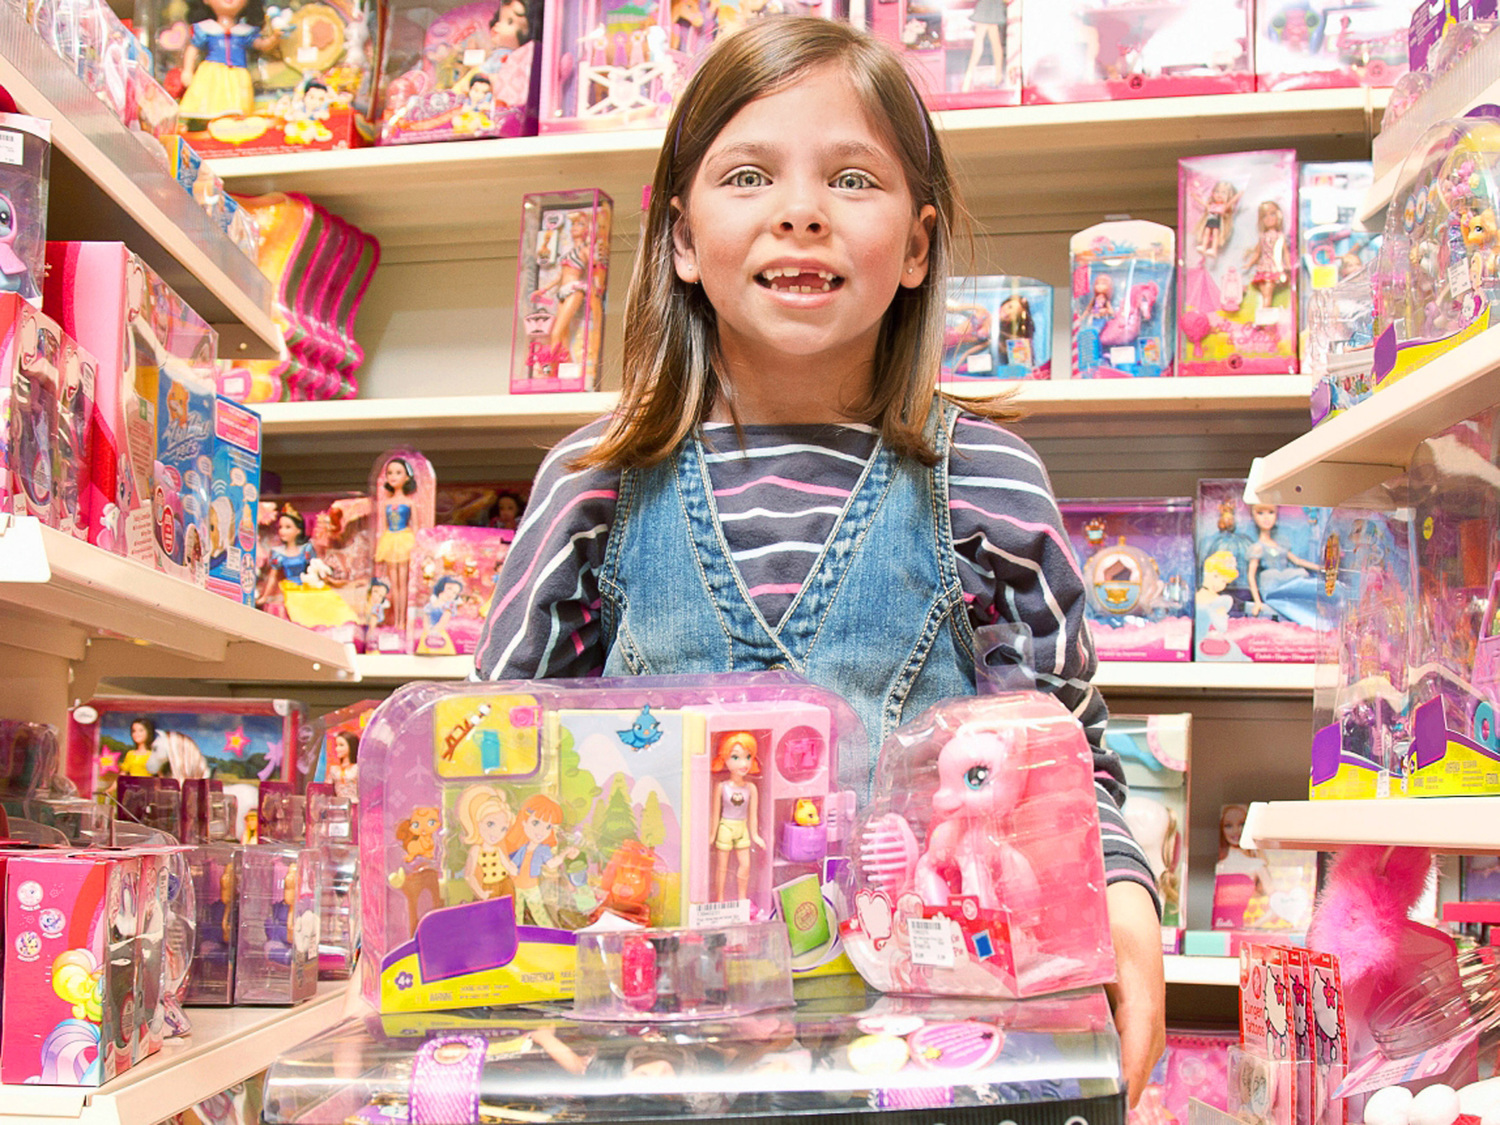 Problematic Stereotypes: Sexism, Now Available in the Toy Aisle — Her ...